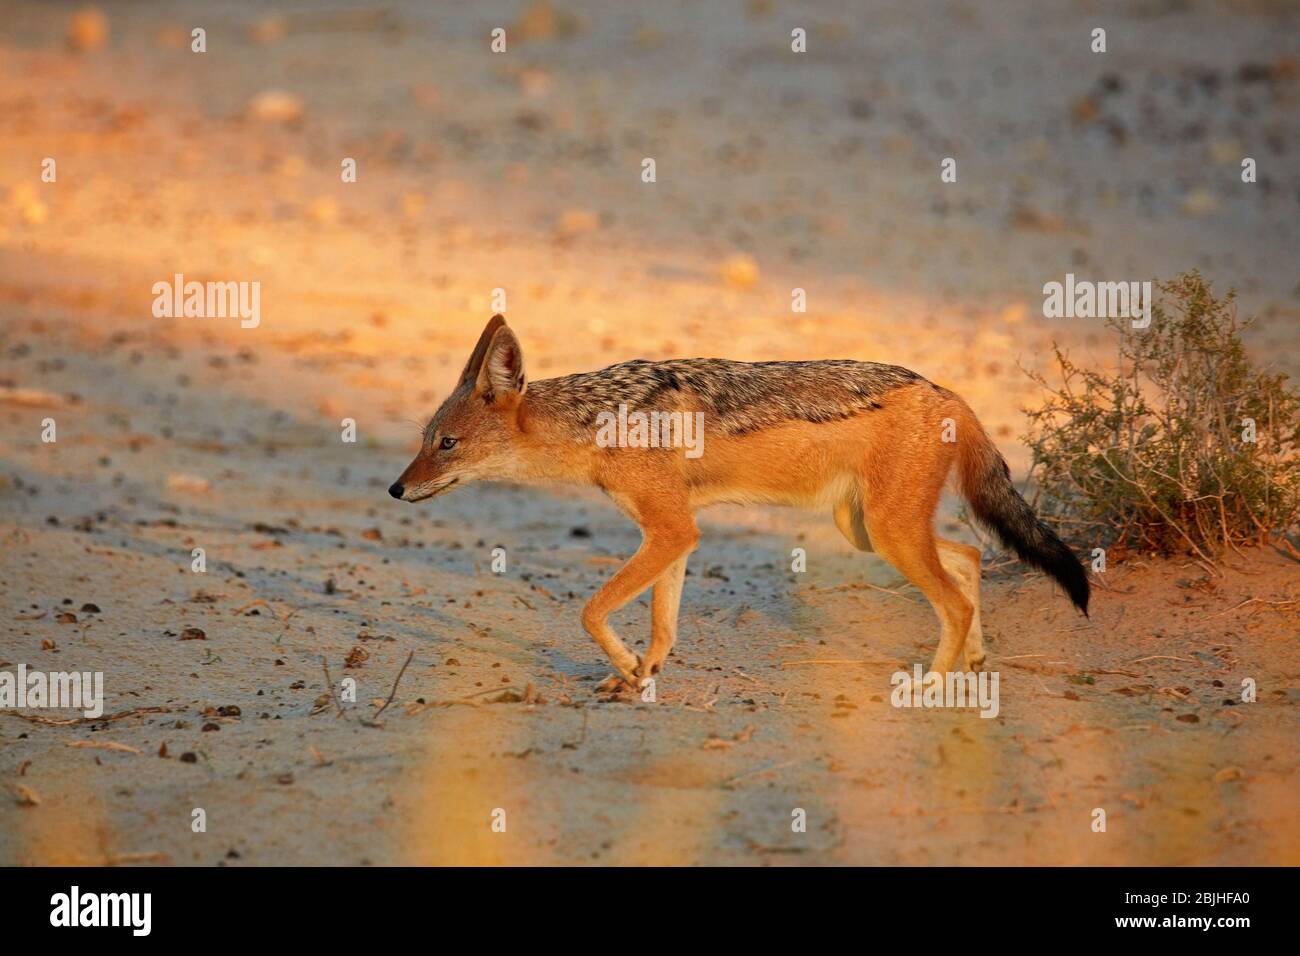 Black-backed jackal (Canis mesomelas), Kgalagadi Transfrontier Park, South Africa Stock Photo